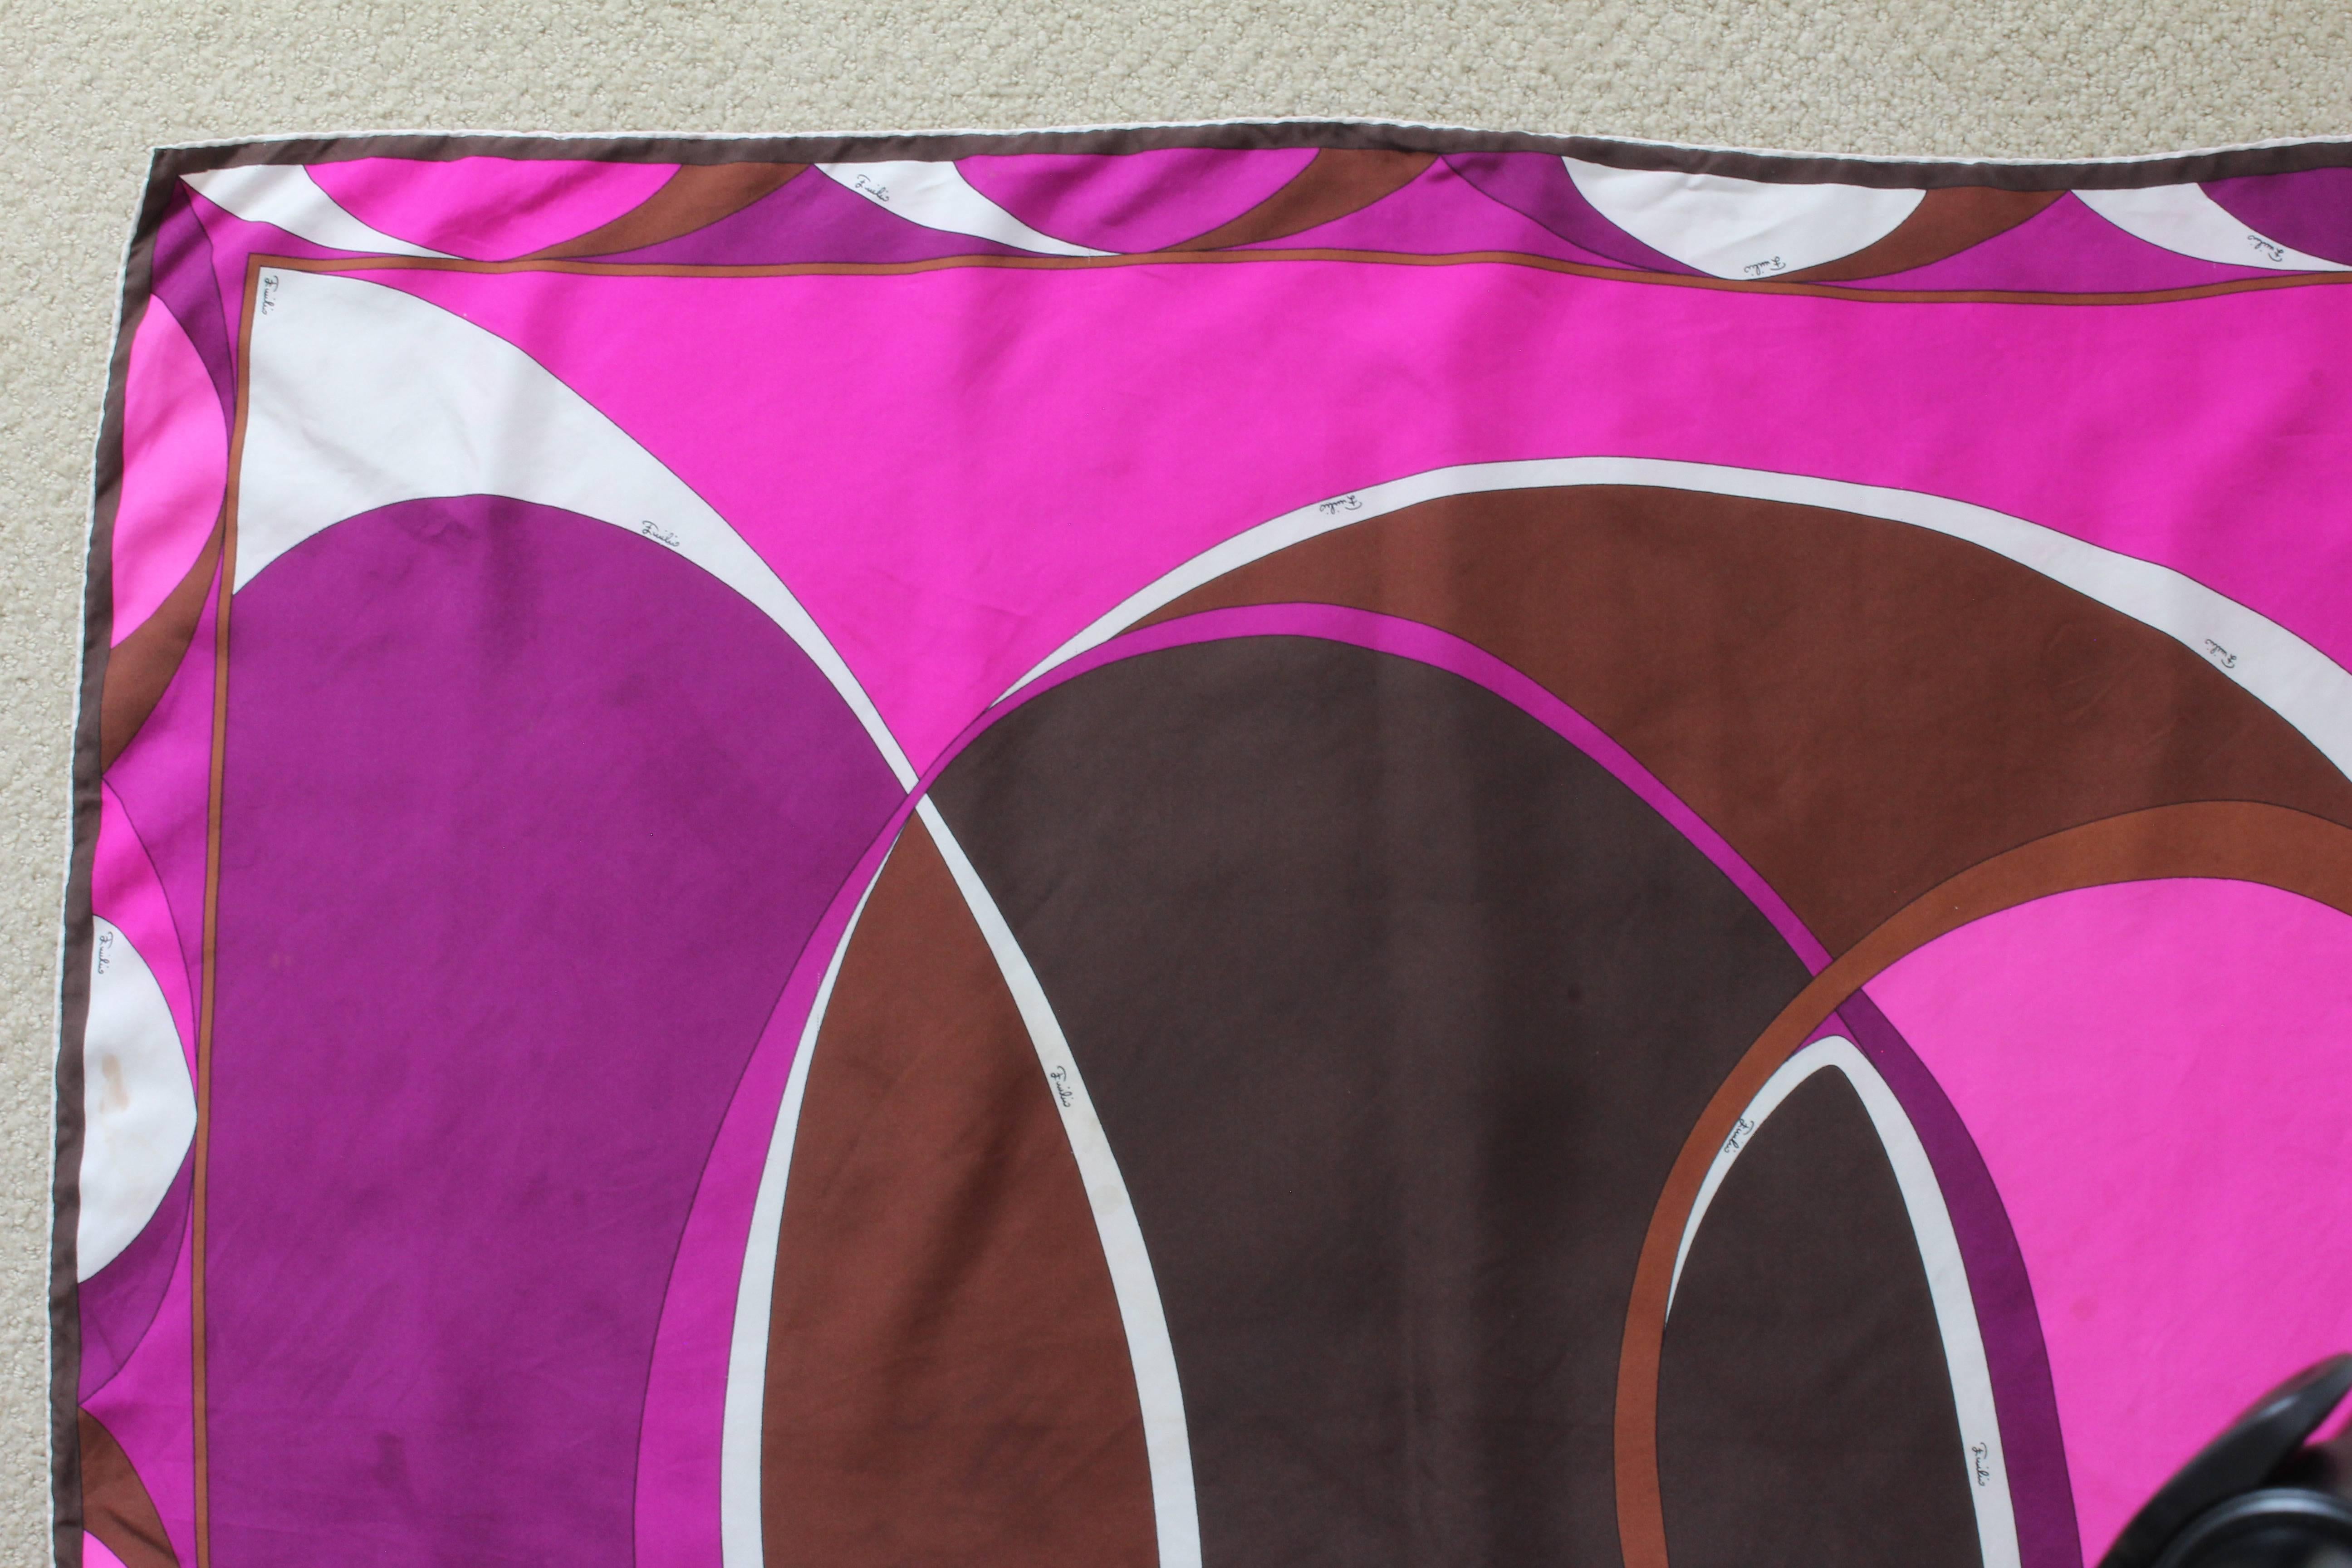 This colorful scarf was made by Emilio Pucci, most likely in the 1980s. Made from silk twill, it features an abstract pattern in shades of brown, purple, pink and white, and hand rolled hems.  

The bold colors and abstract design are perfect for